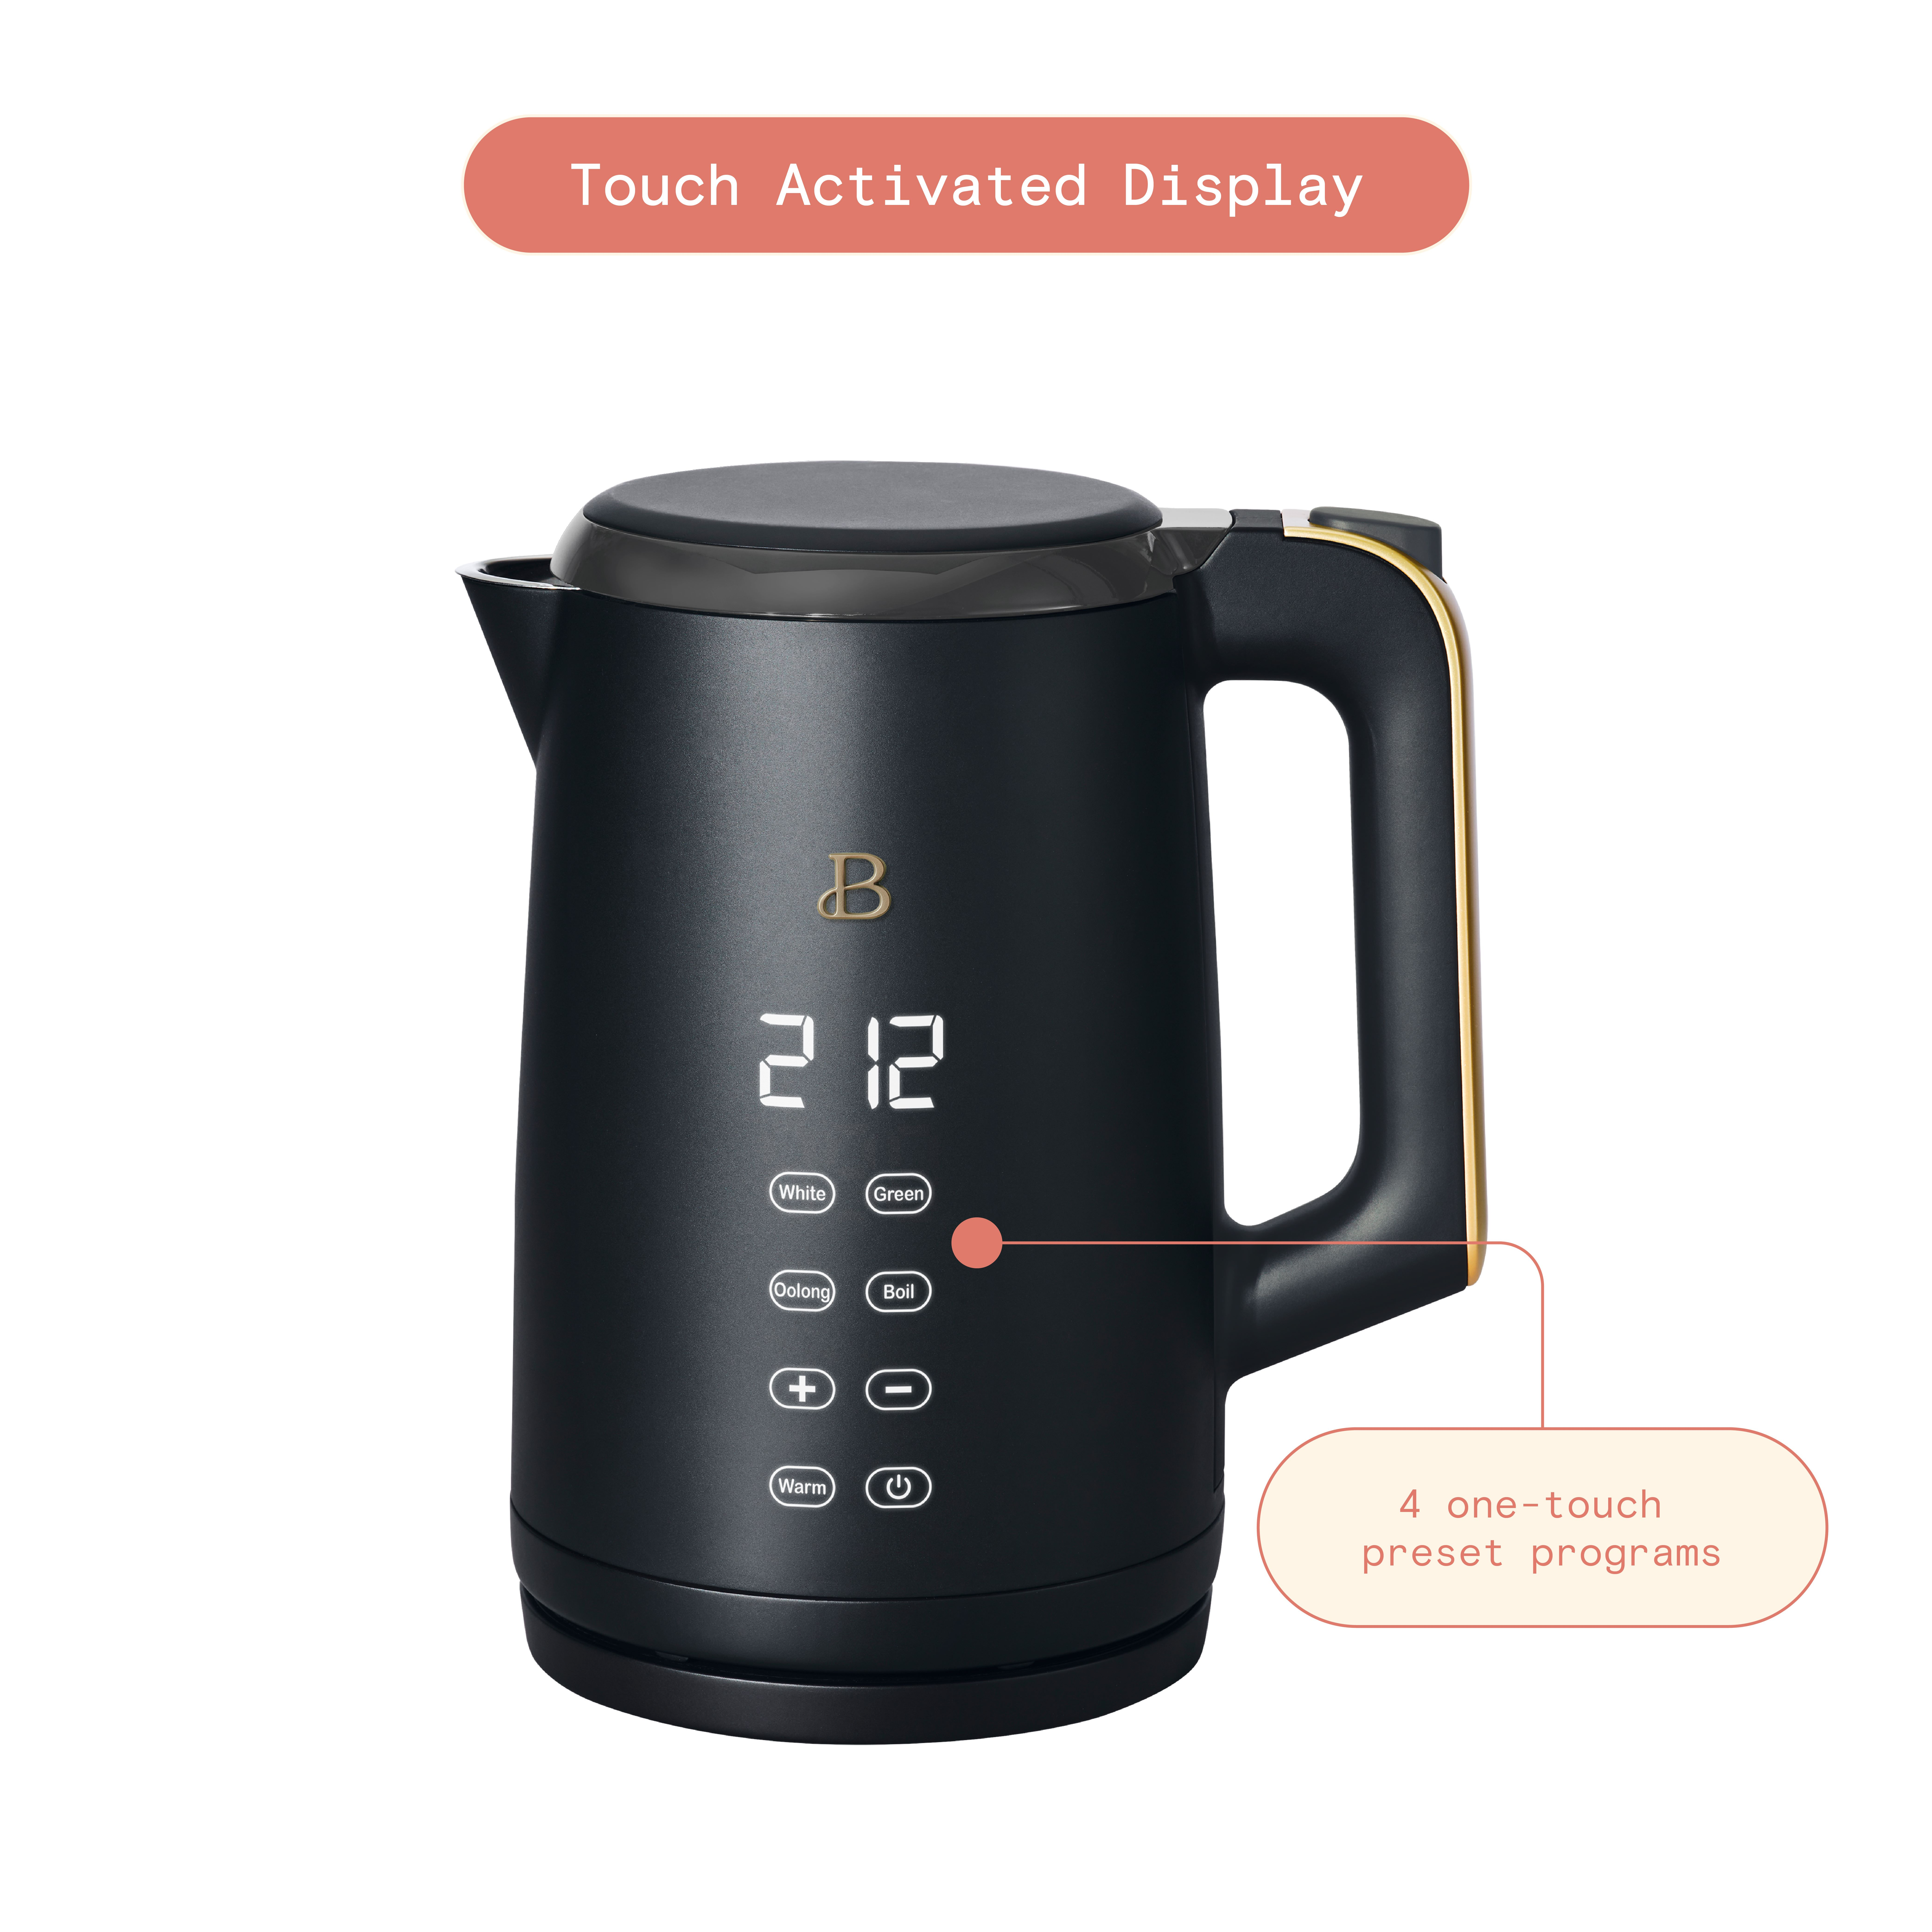 Beautiful 1.7-Liter Electric Kettle 1500 W with One-Touch Activation, Black Sesame by Drew Barrymore - image 4 of 7